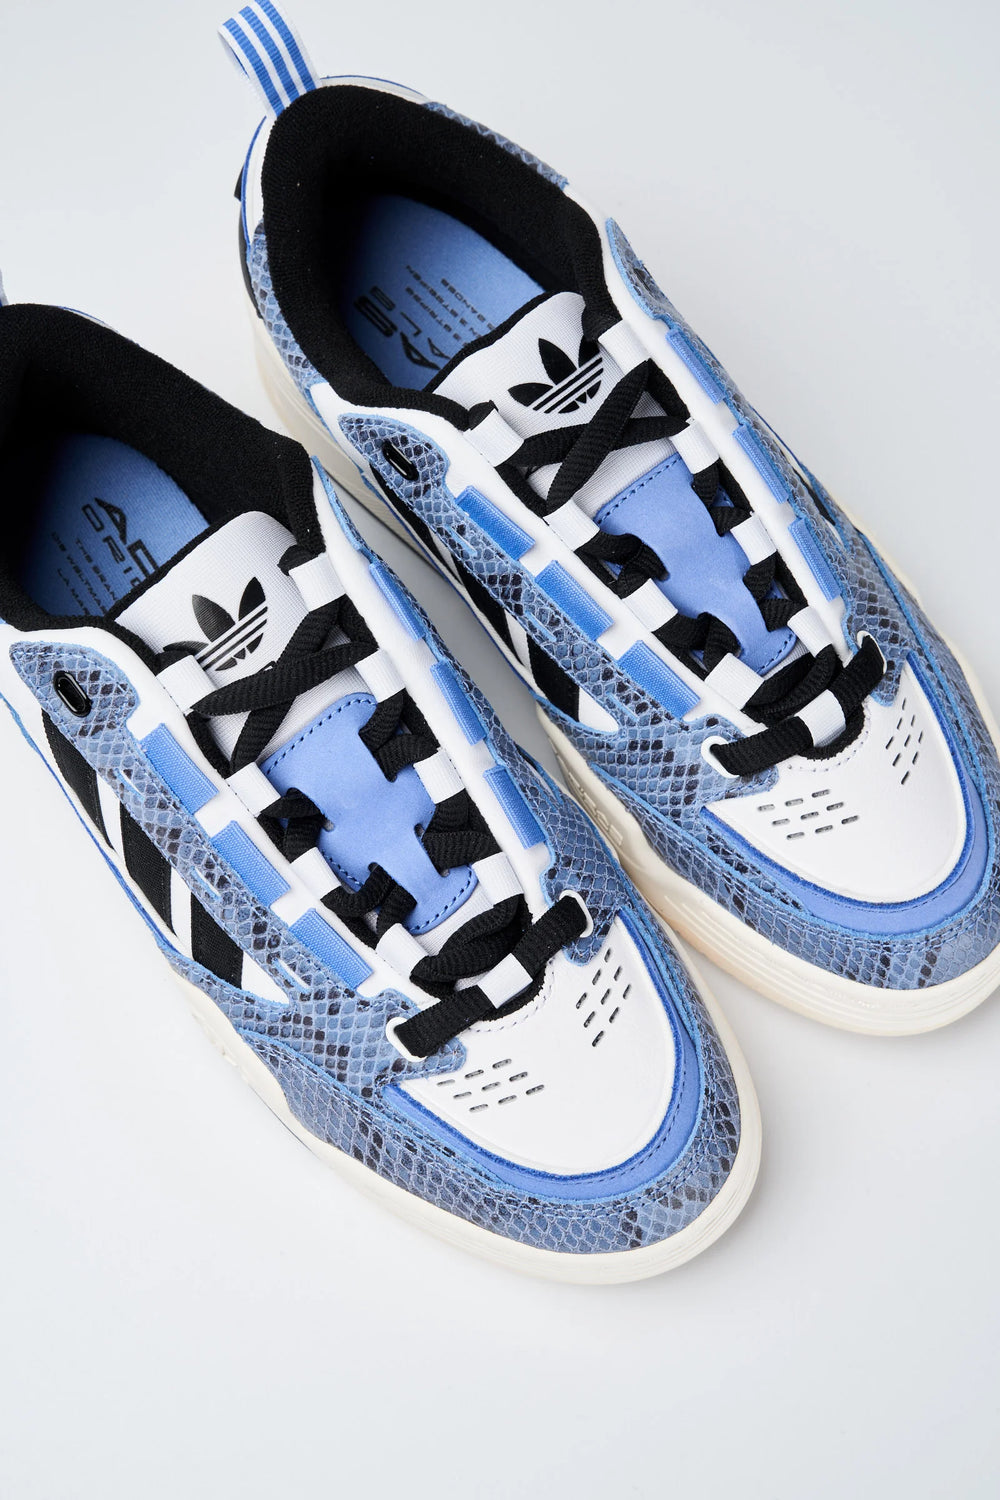 Kissuomo.it and Adidas: An icon of style in men's fashion eCommerce